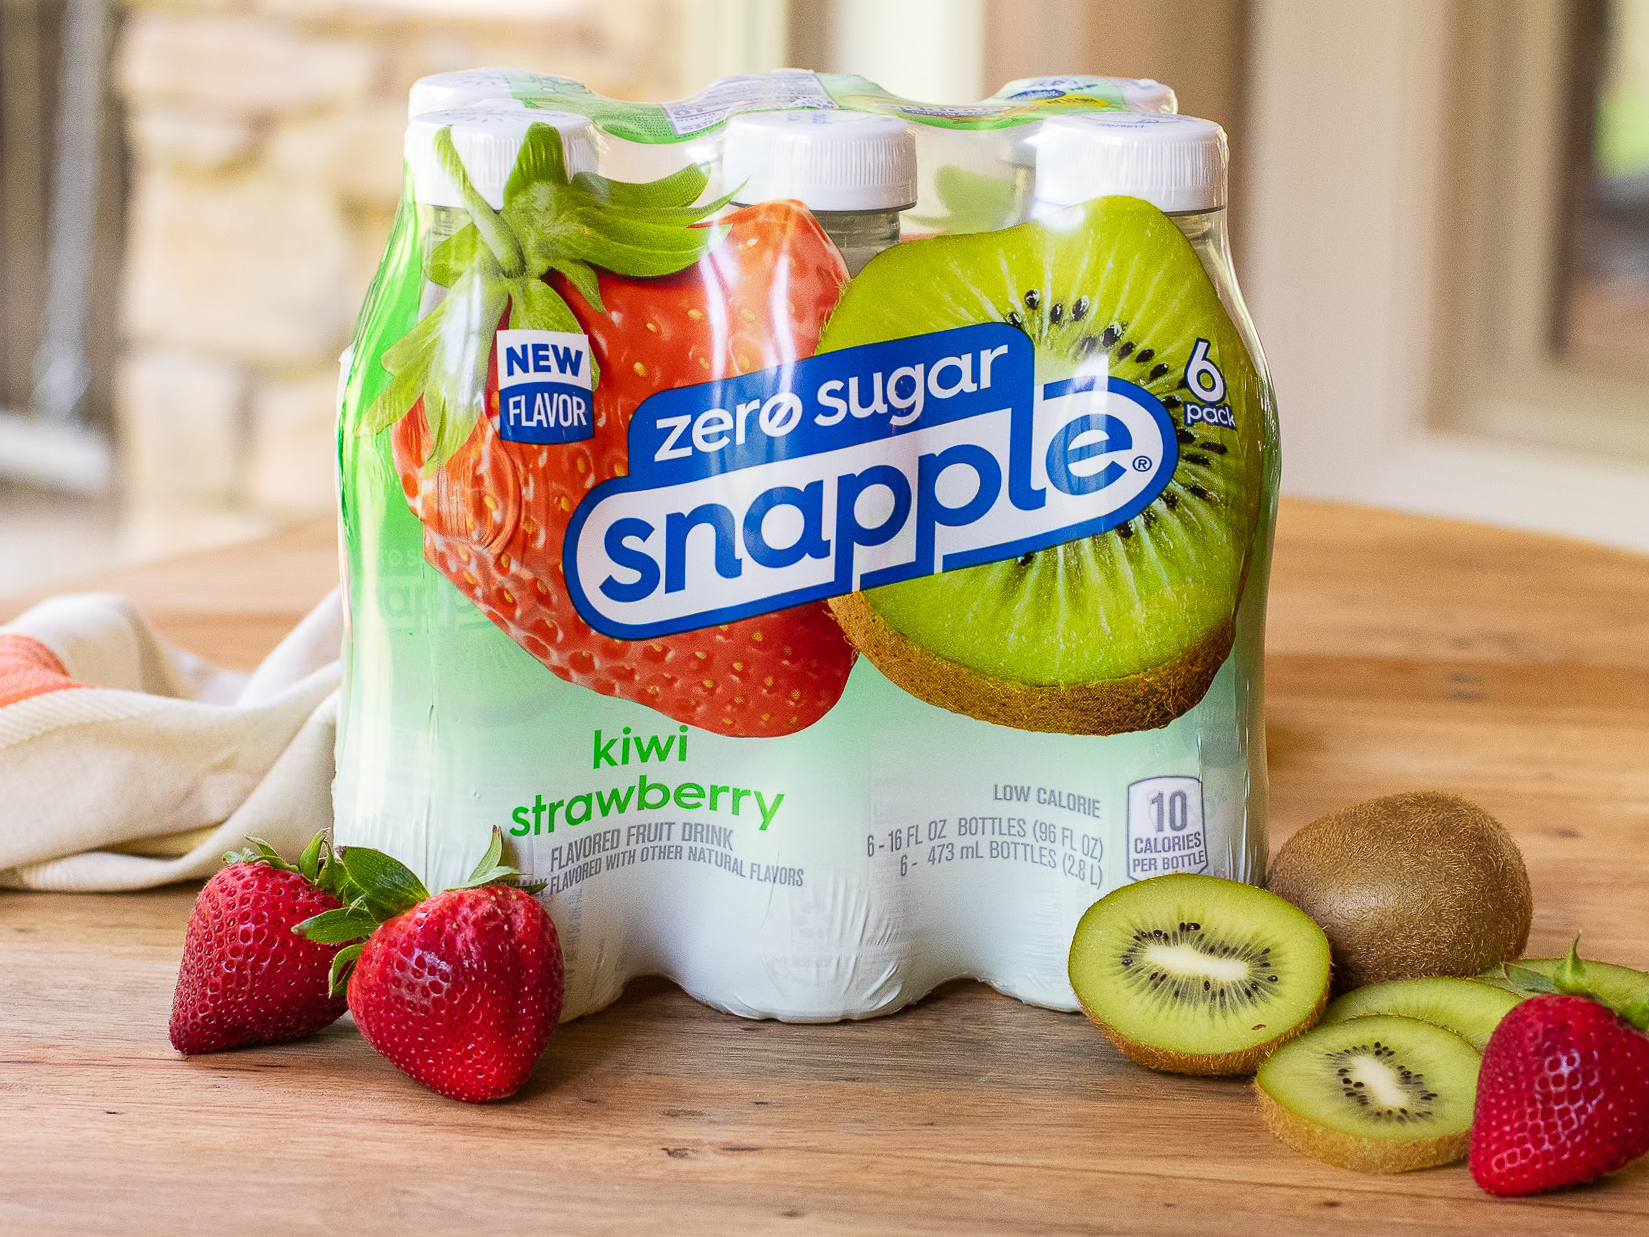 Zero Sugar Snapple 6-Packs As Low As $3.99 At Publix